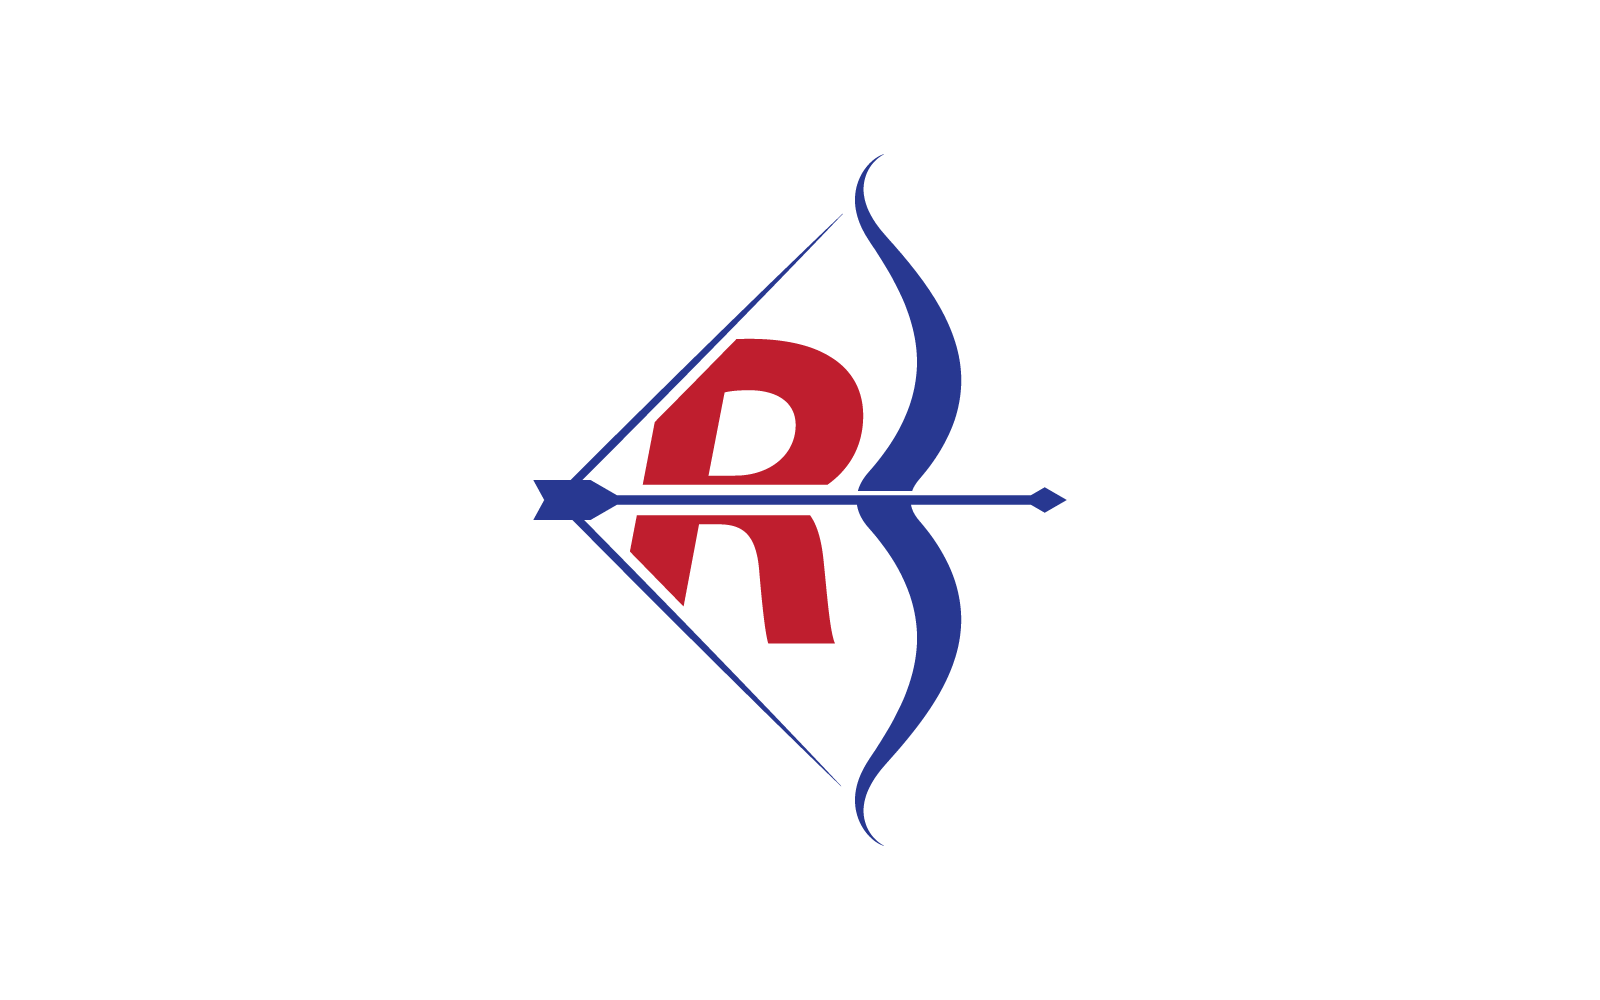 Archery logo With R initial letter vector illustration